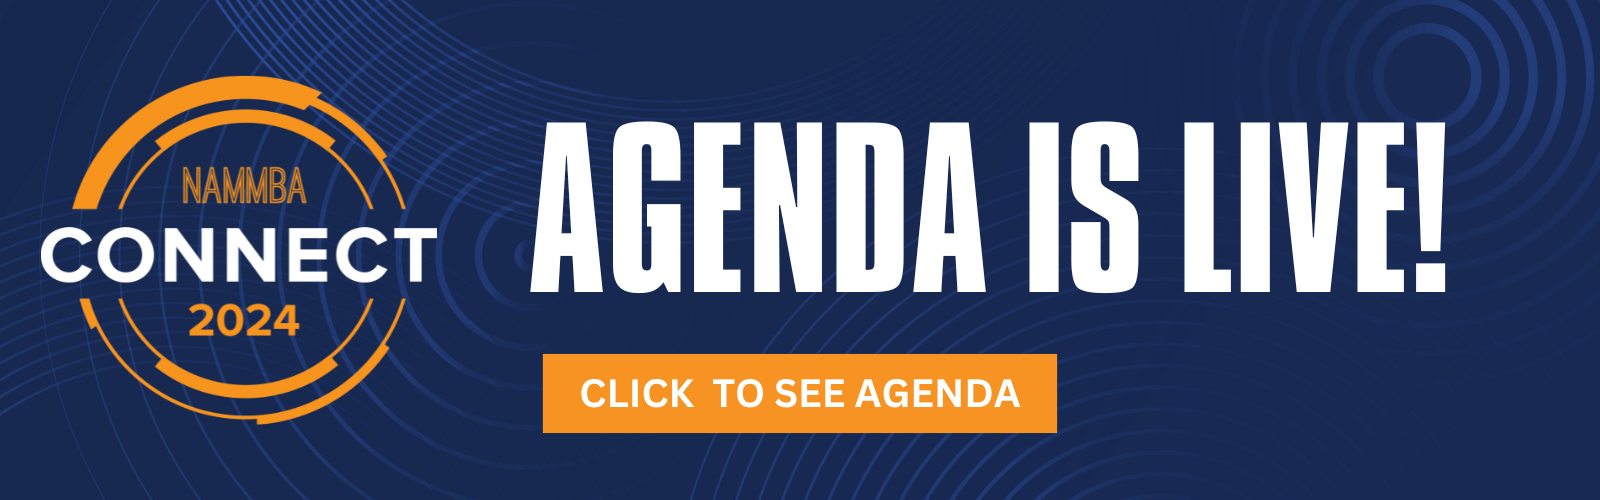 C24 - Agenda is now live (1600 x 500 px).png